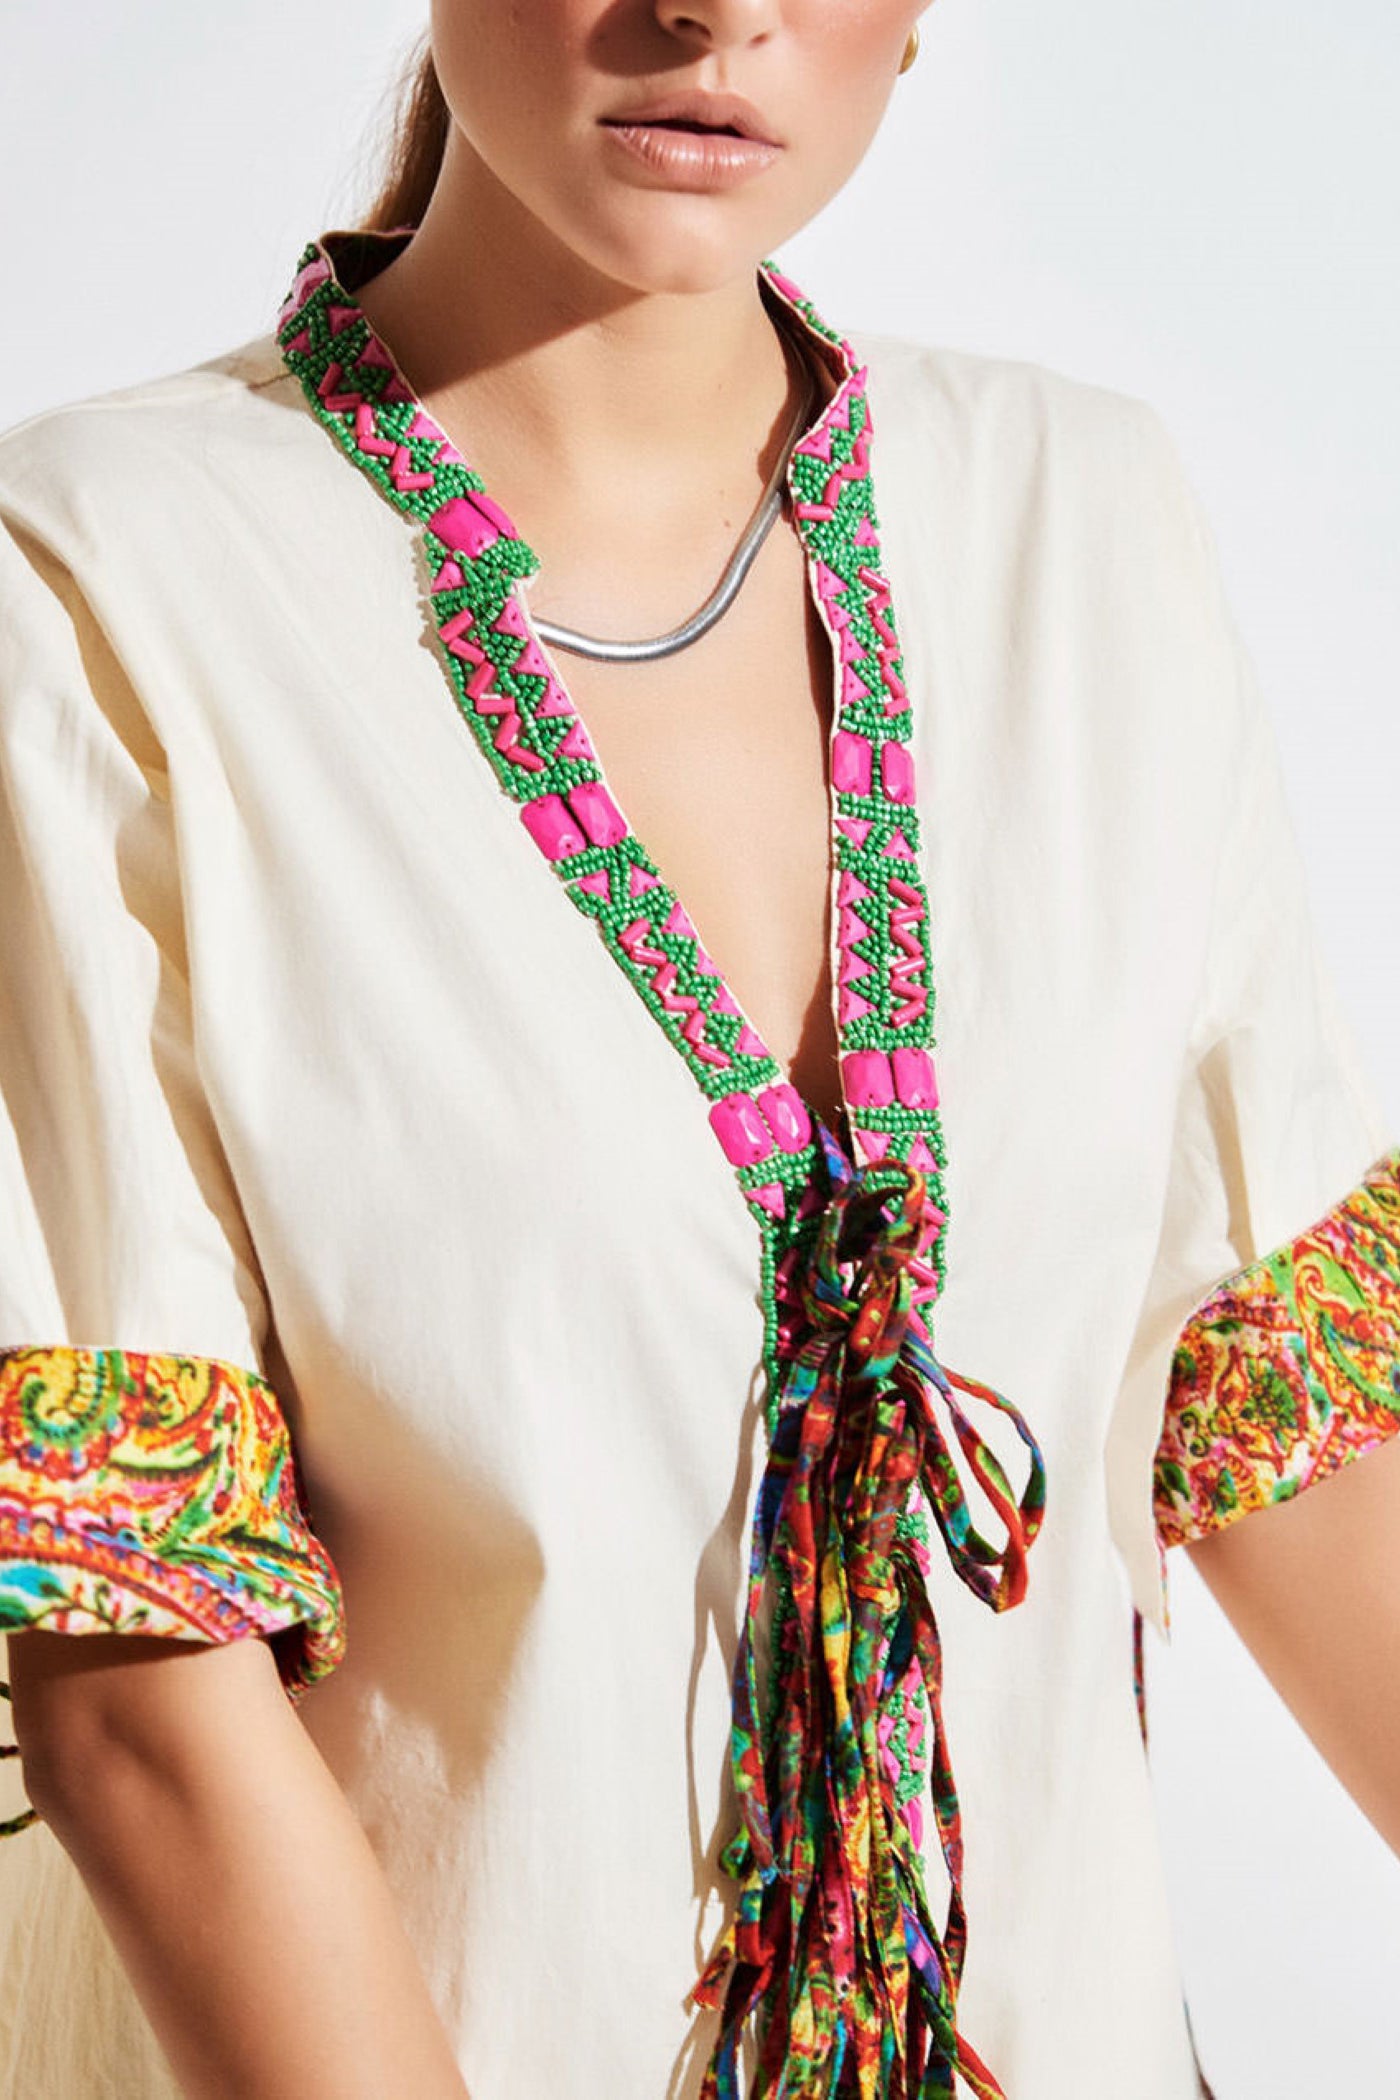 embroided neck top with stylish strings